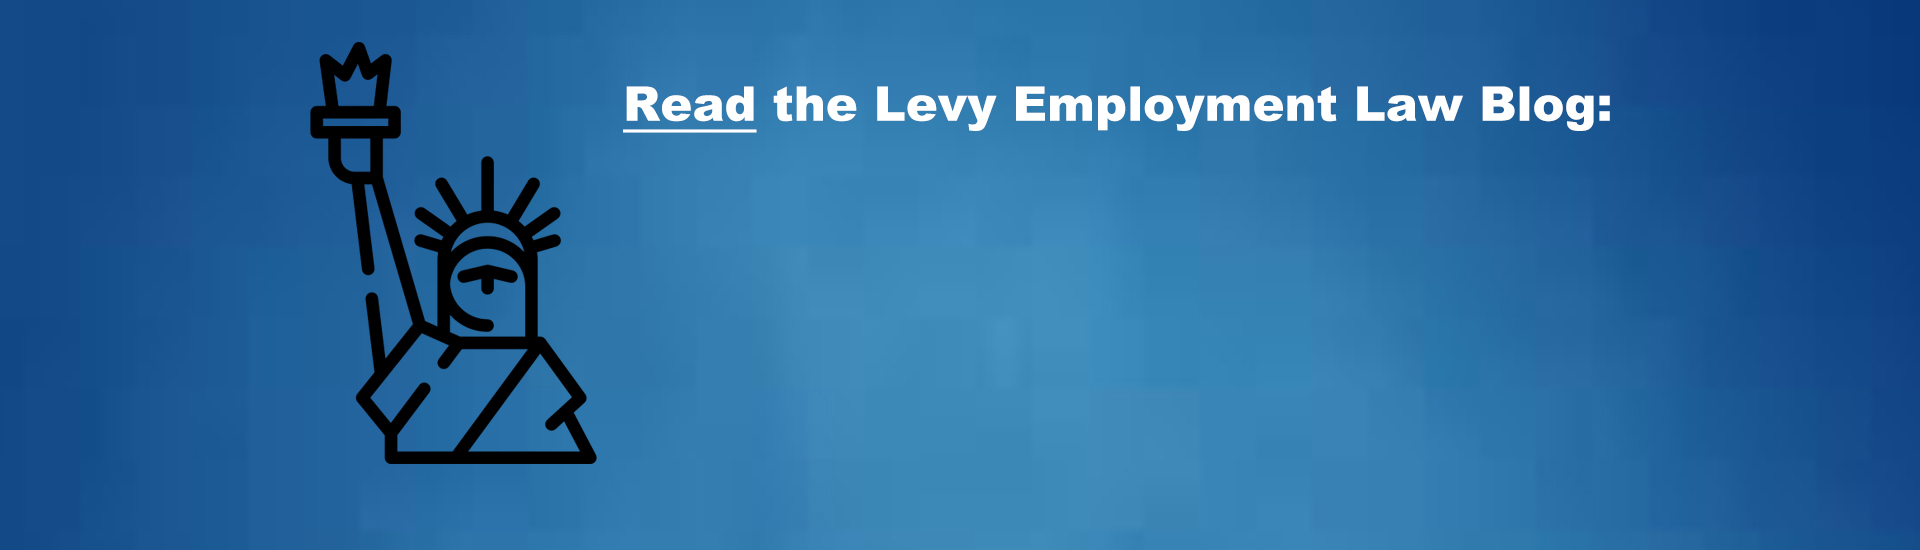 Levy Employment Law